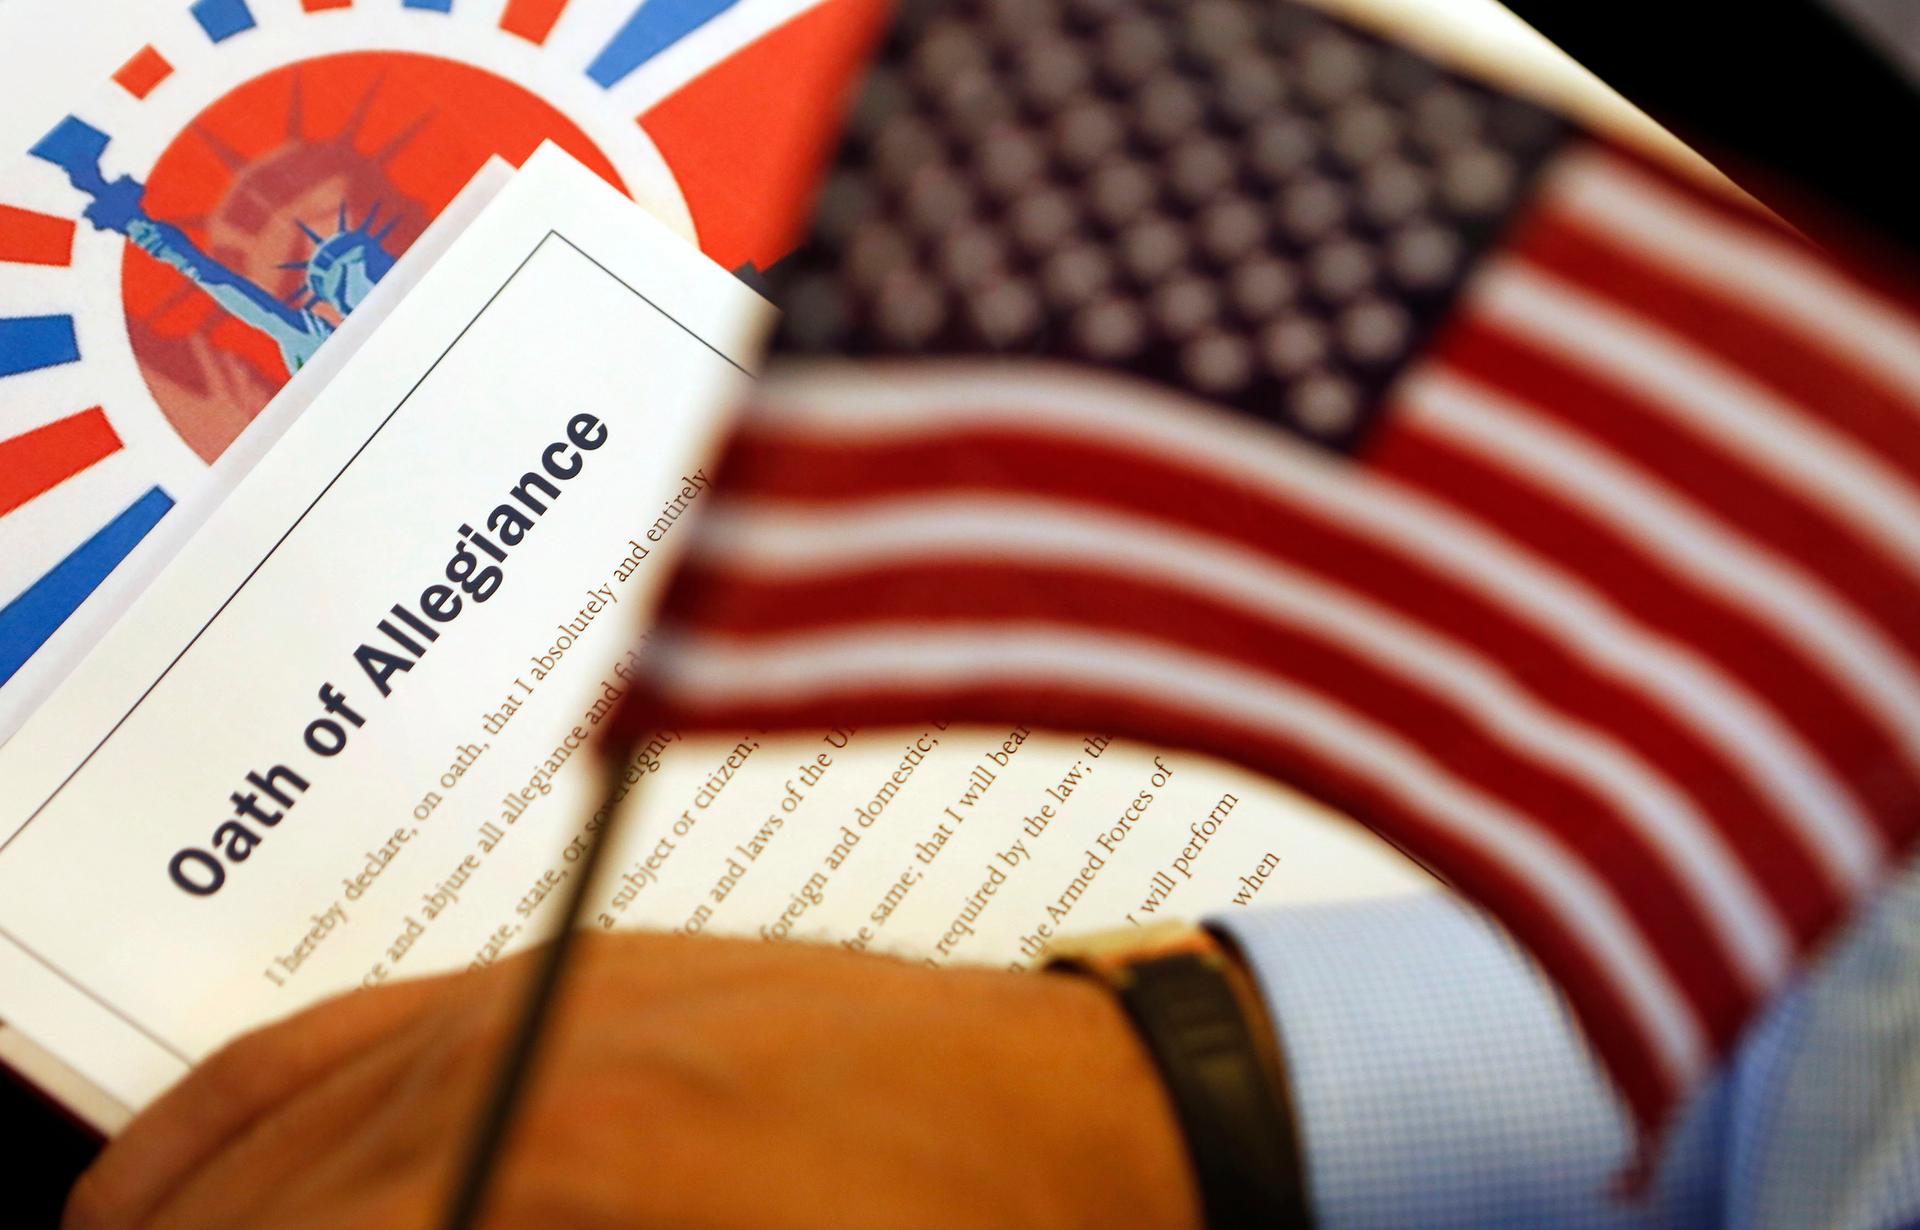 The Oath of Allegiance is held next to an American flag during a naturalization ceremony for citizen candidates in Washington, DC, on July 3, 2013. 